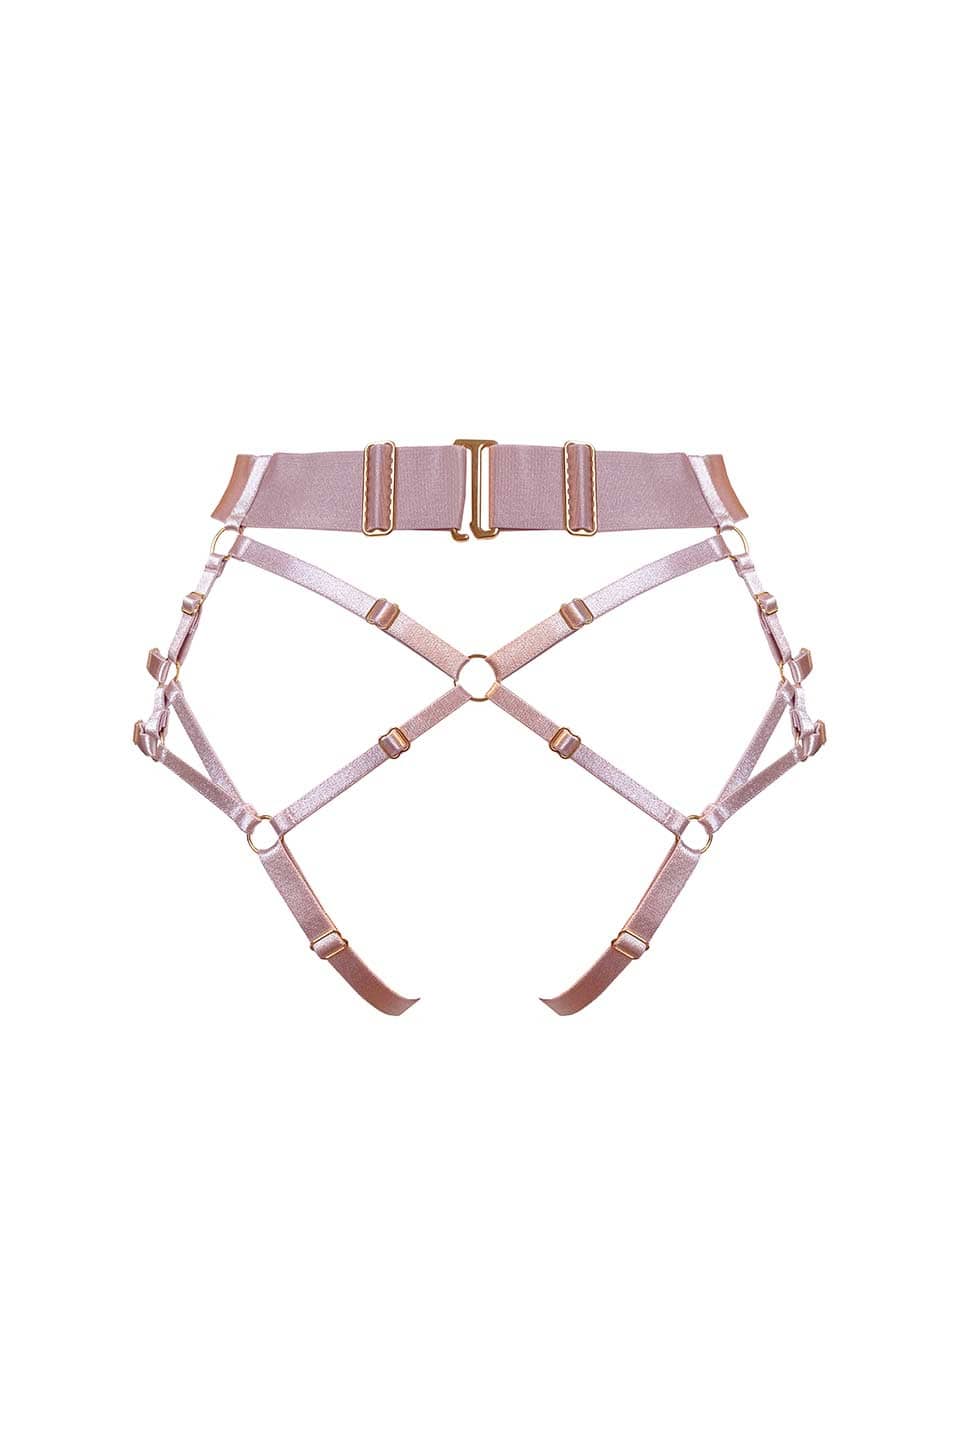 Atelier bordelle kora multi style harness brief with thong rose back